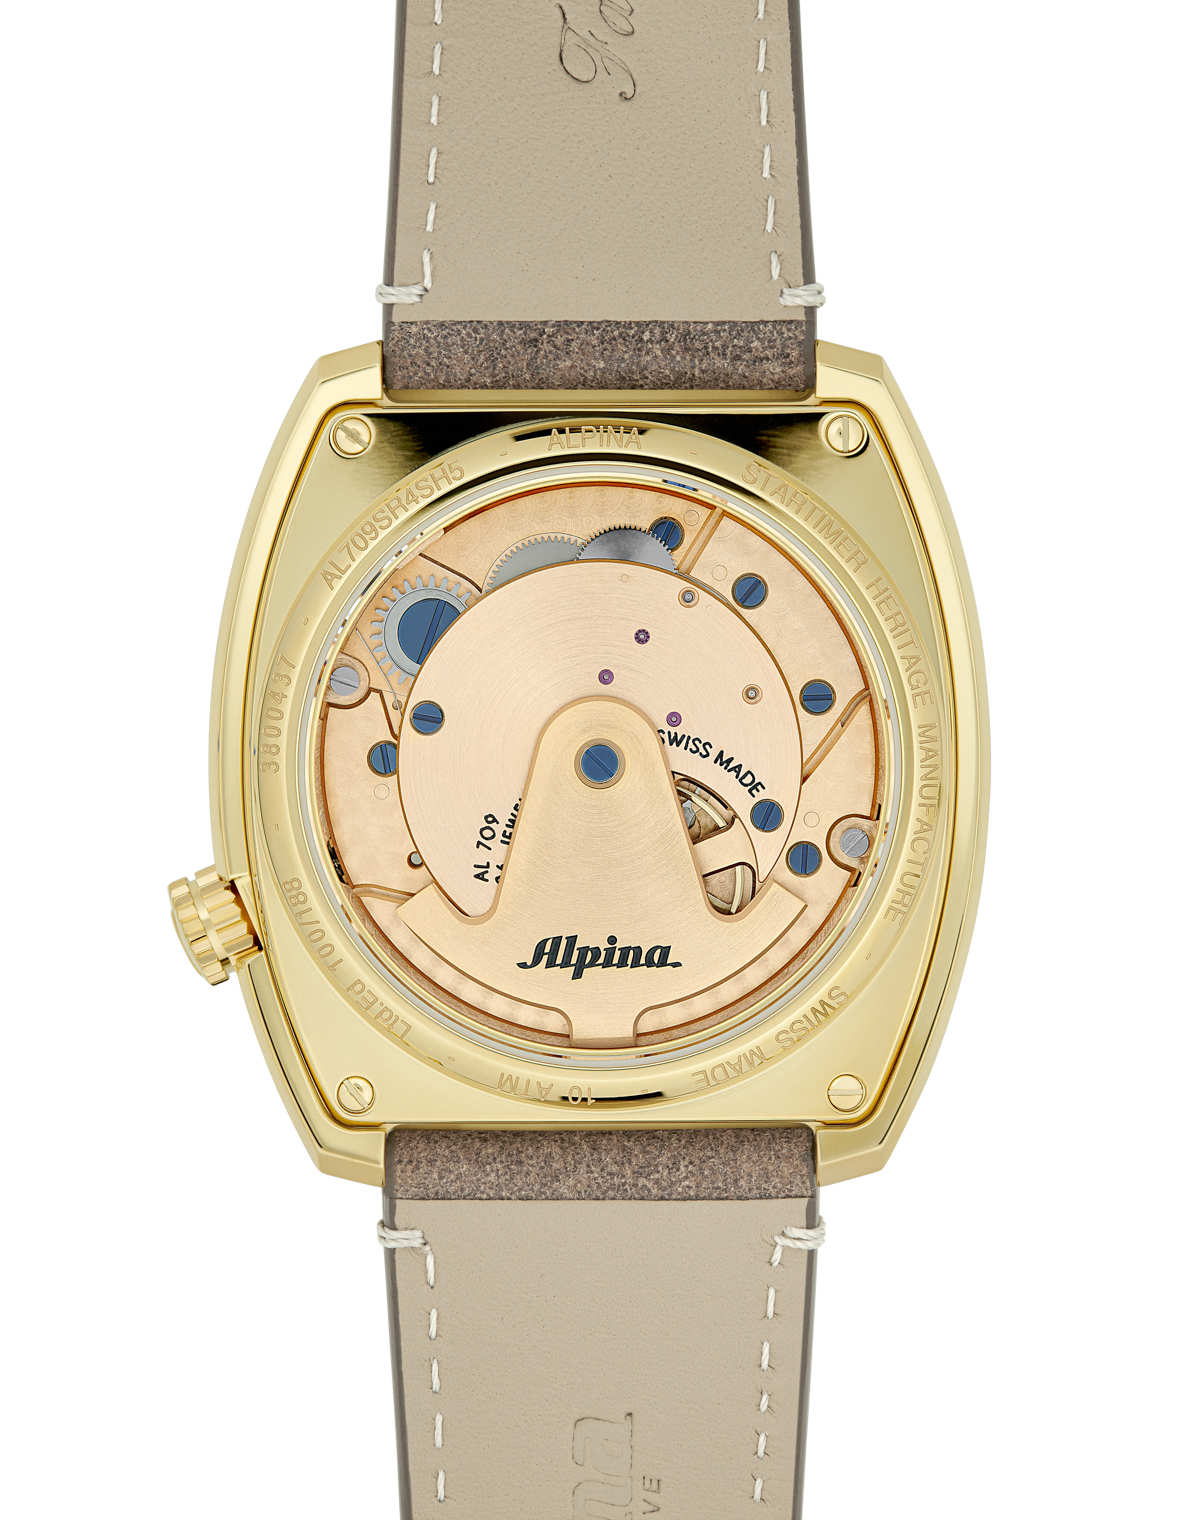 Alpina Develops Sixth Manufacture Calibre In Honour Of The Legendary 